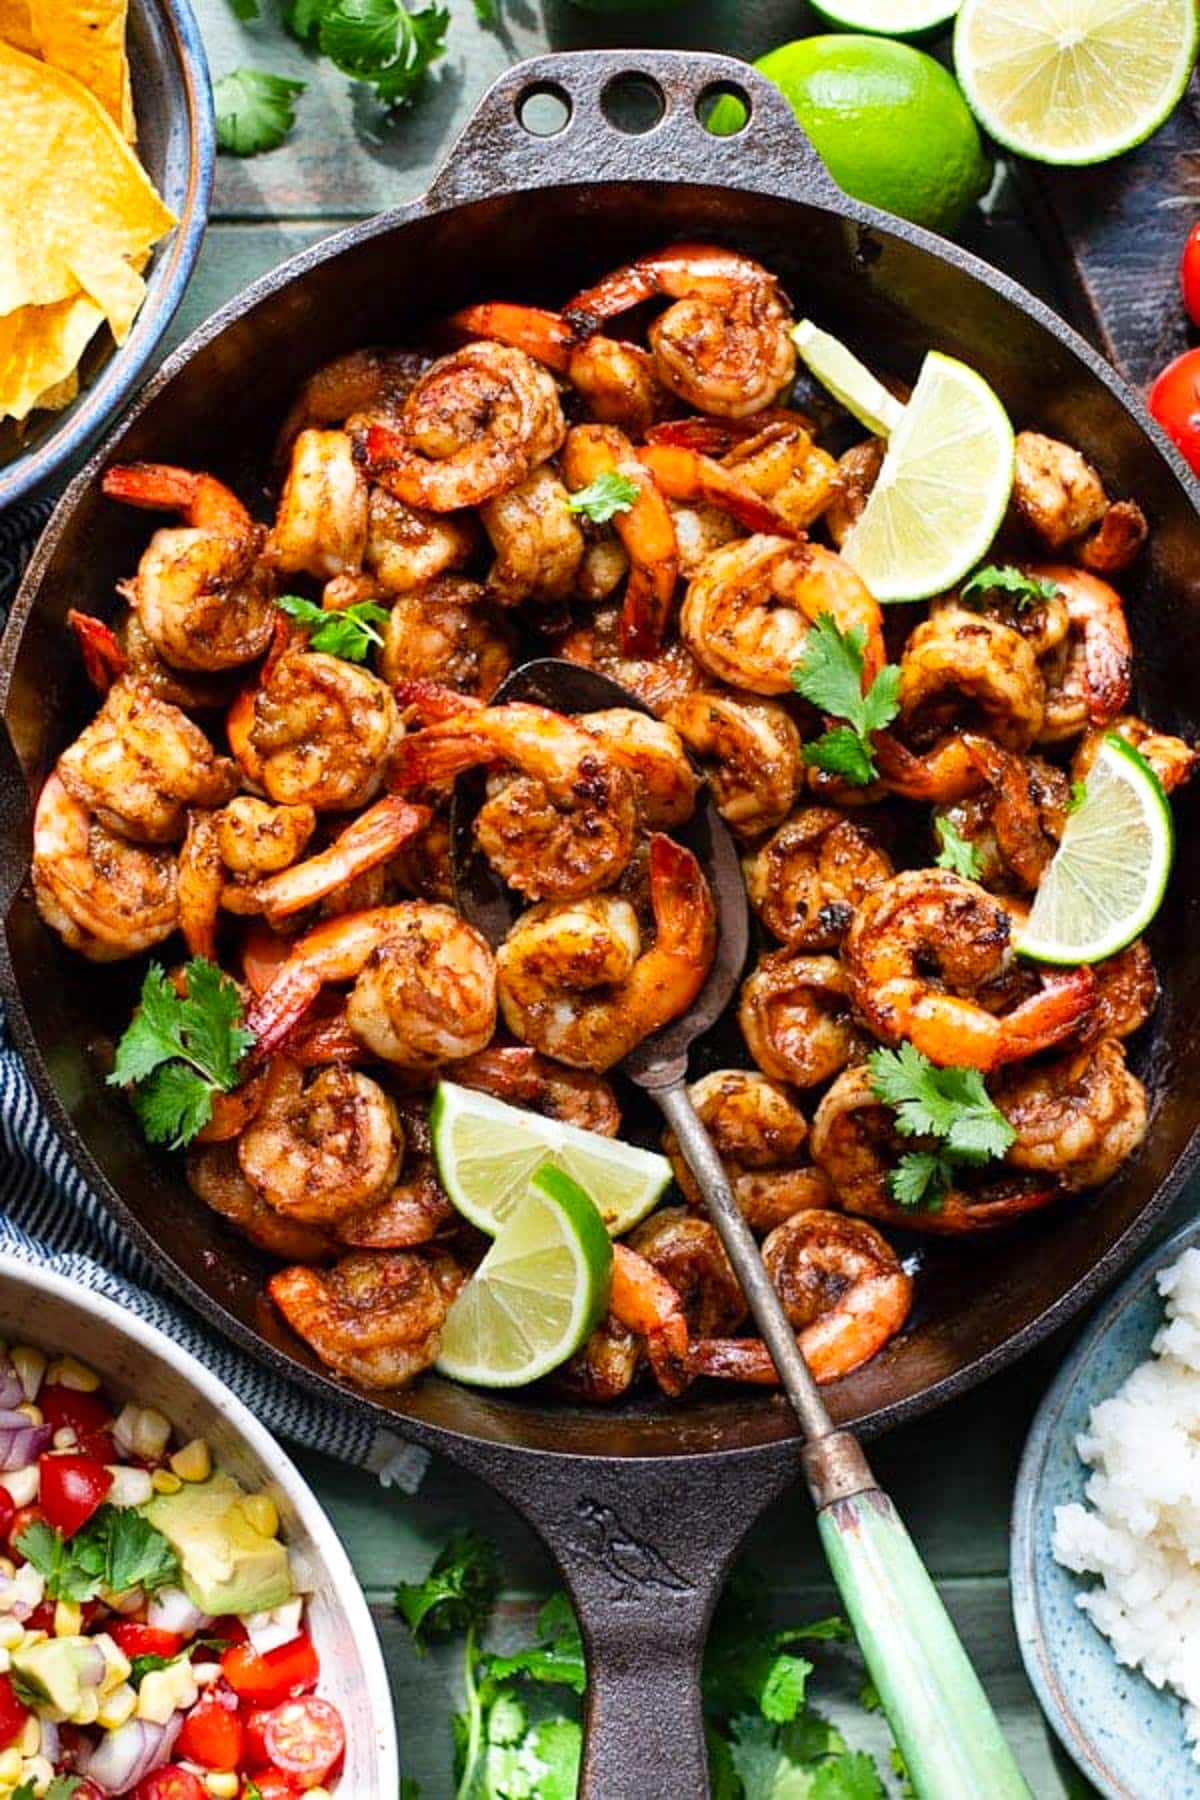 Overhead image of Mexican shrimp in a skillet on a green table.